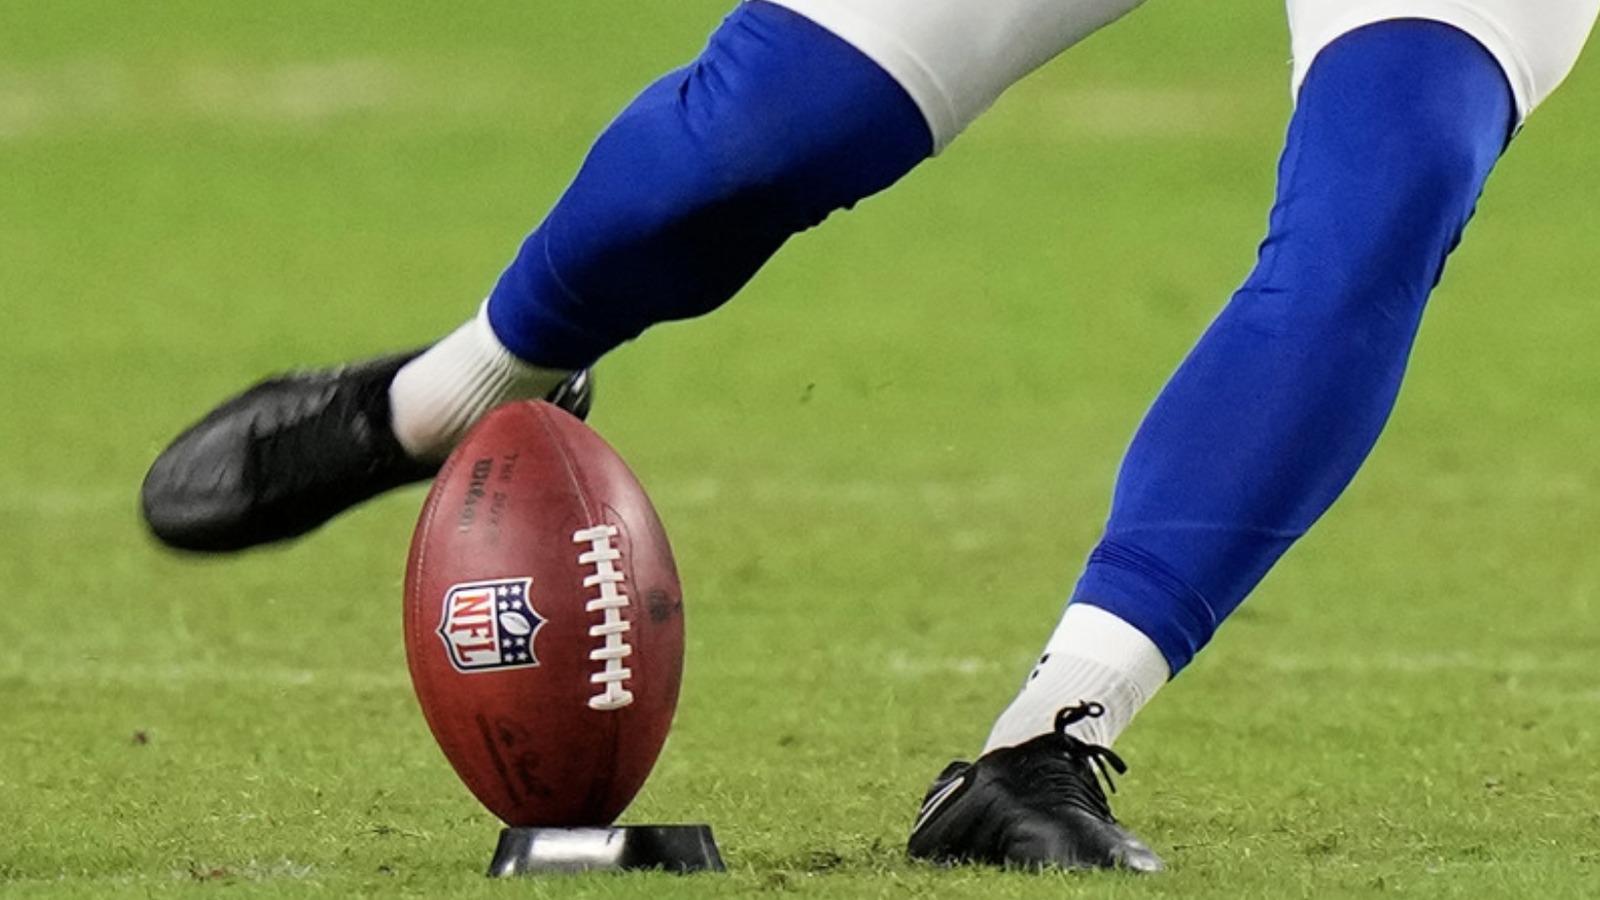 NFL fans are divided after the league announced its new kickoff rules